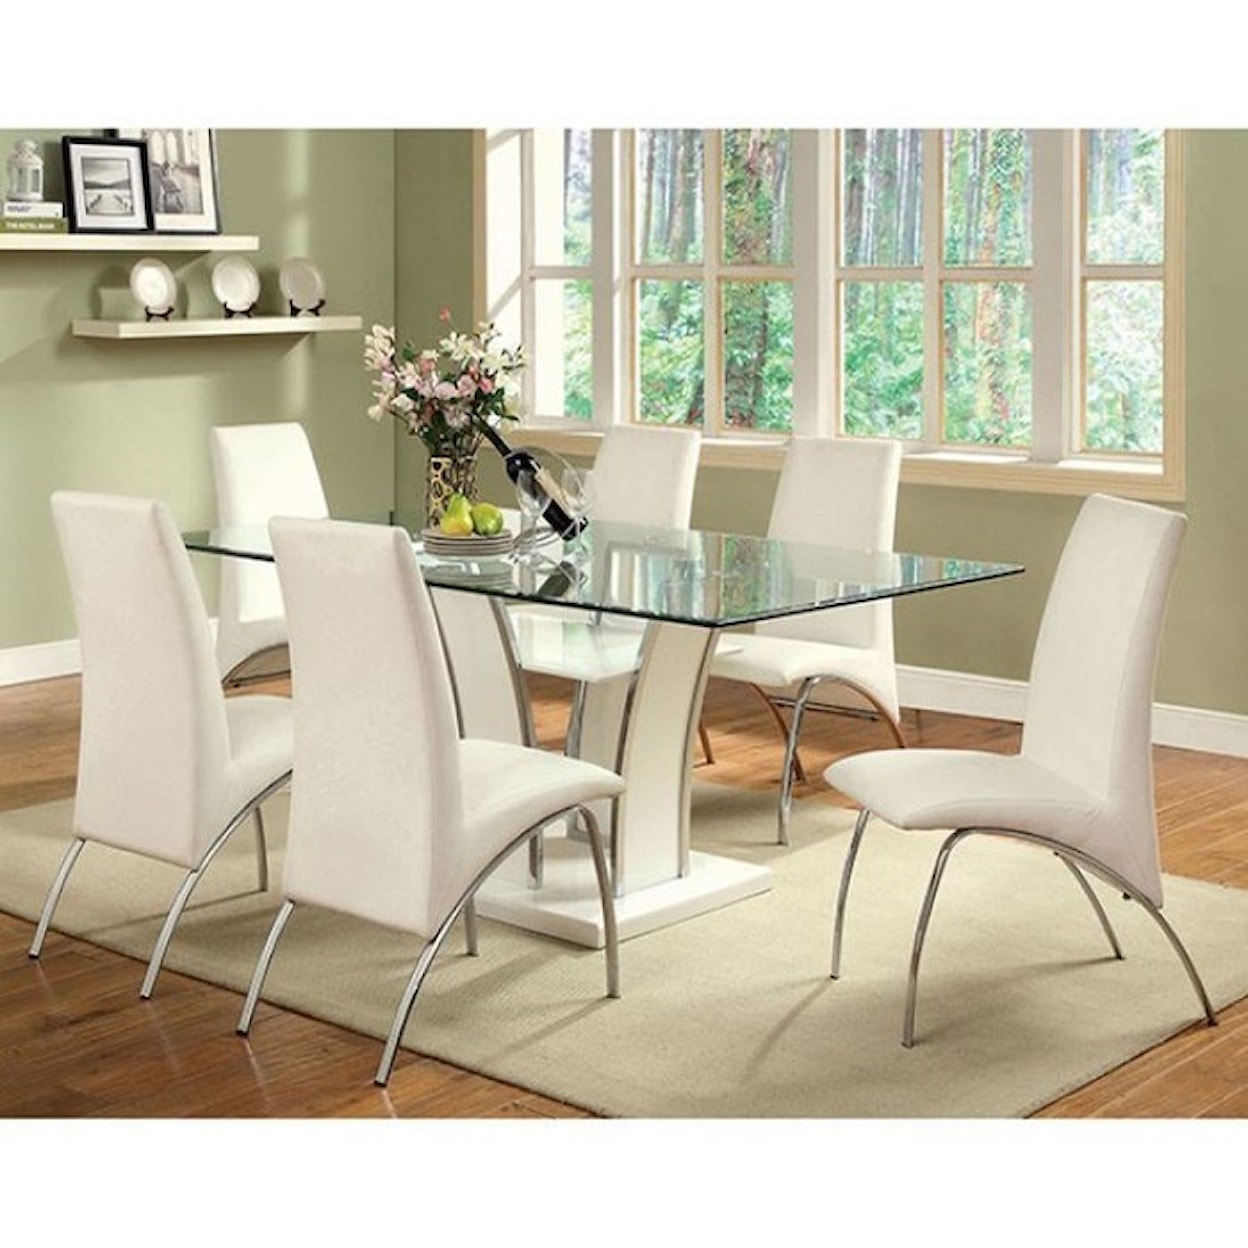 Furniture of America Glenview Dining Table